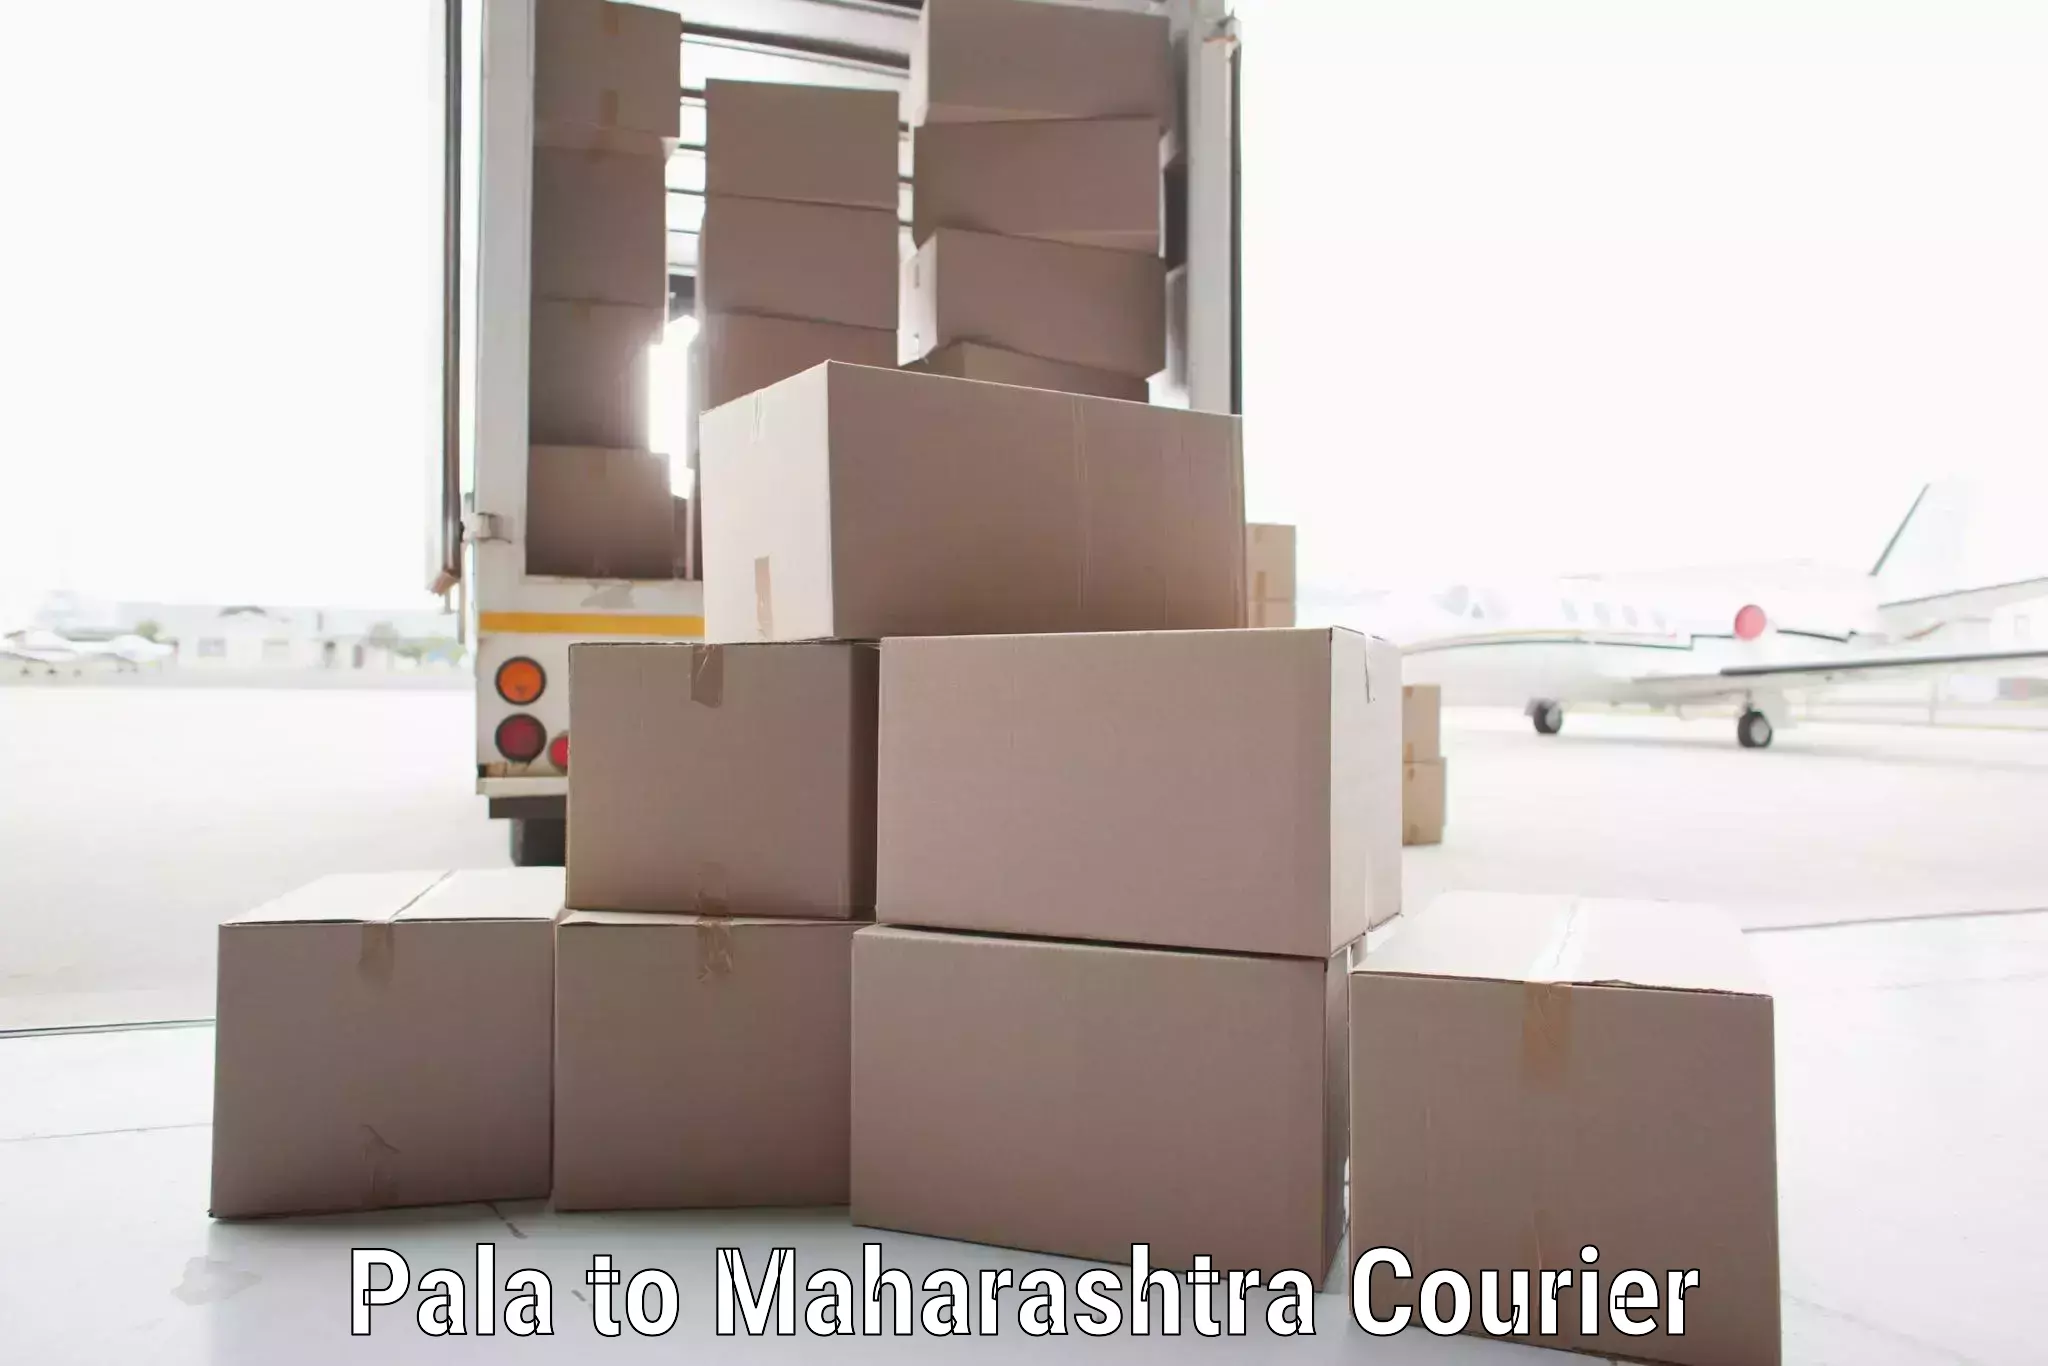 Global courier networks Pala to Dusarbid